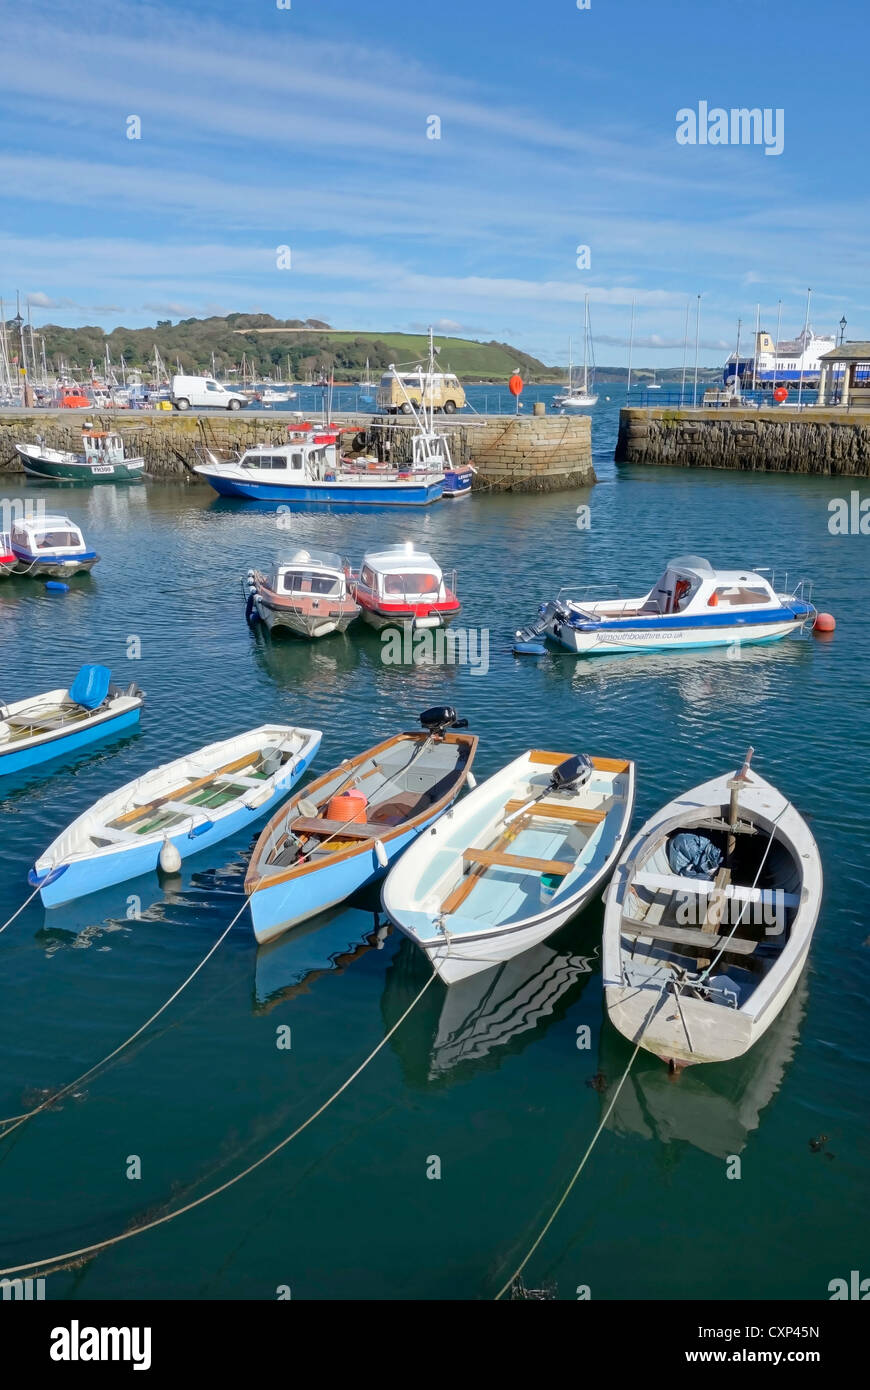 Falmouth old small inner harbour boats, Cornwall England UK. Stock Photo